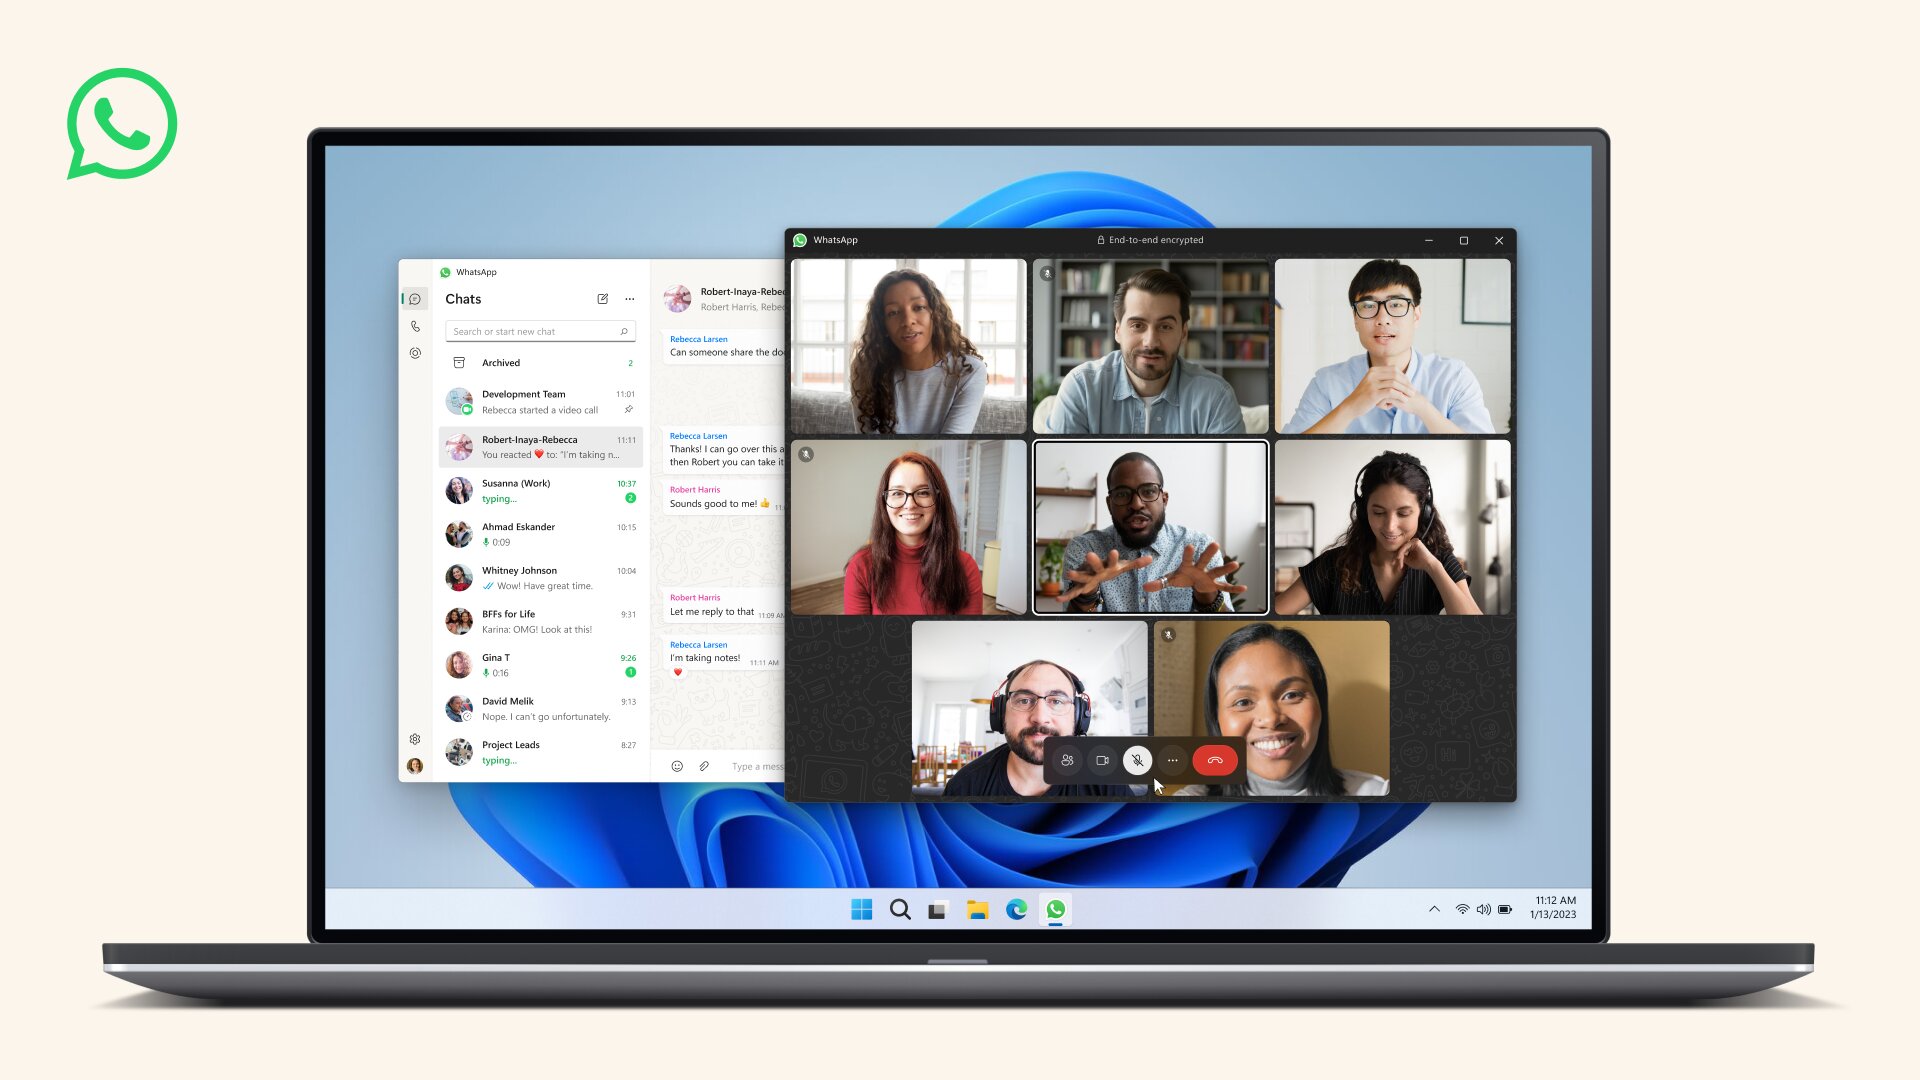 WhatsApp just got a lot faster on desktop, adds support for 8 person video calls